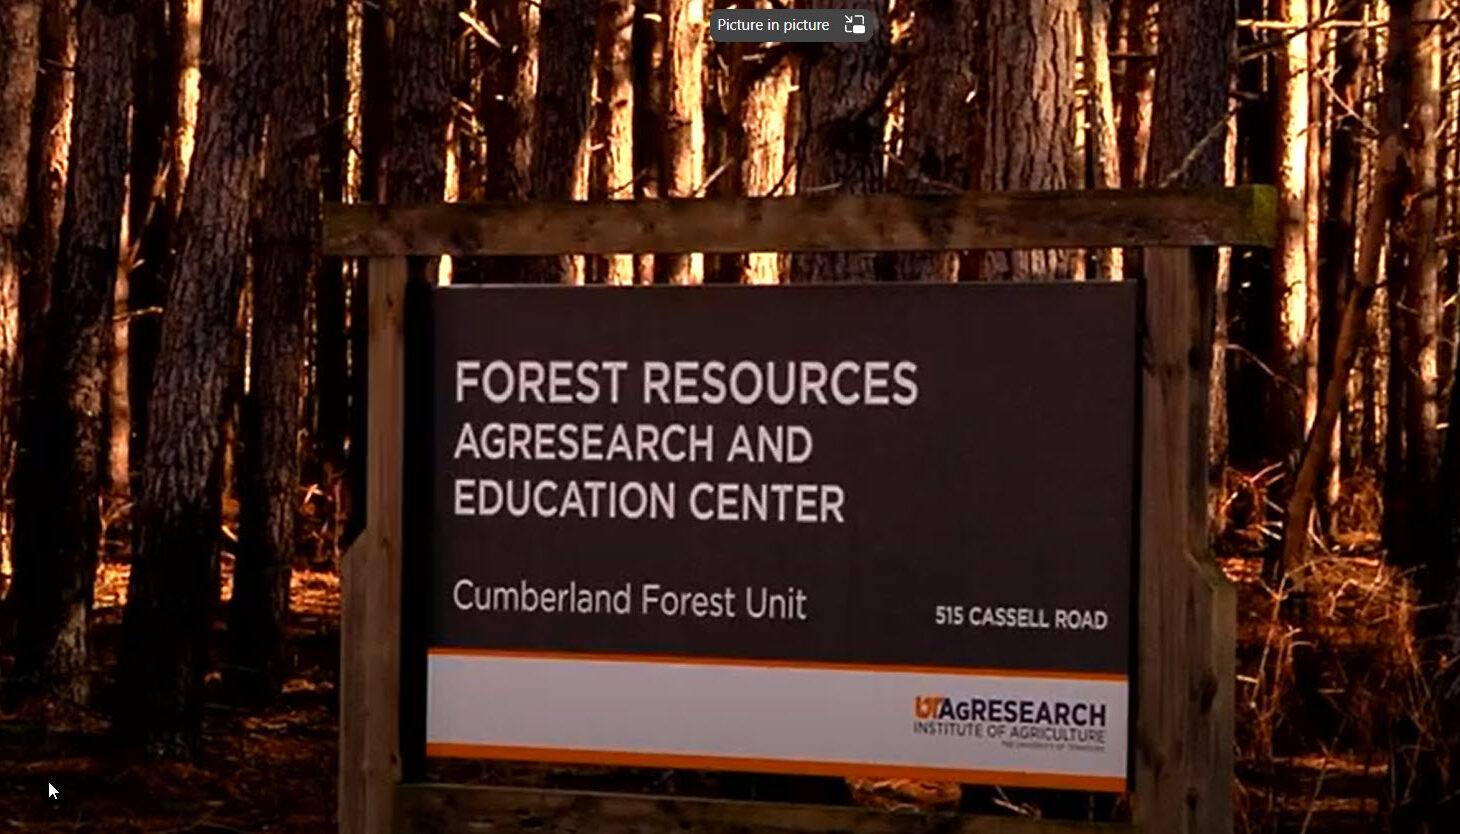 Administrative sign for the Cumberland Forest Unit of the Forest Resources AgResearch and Education Center